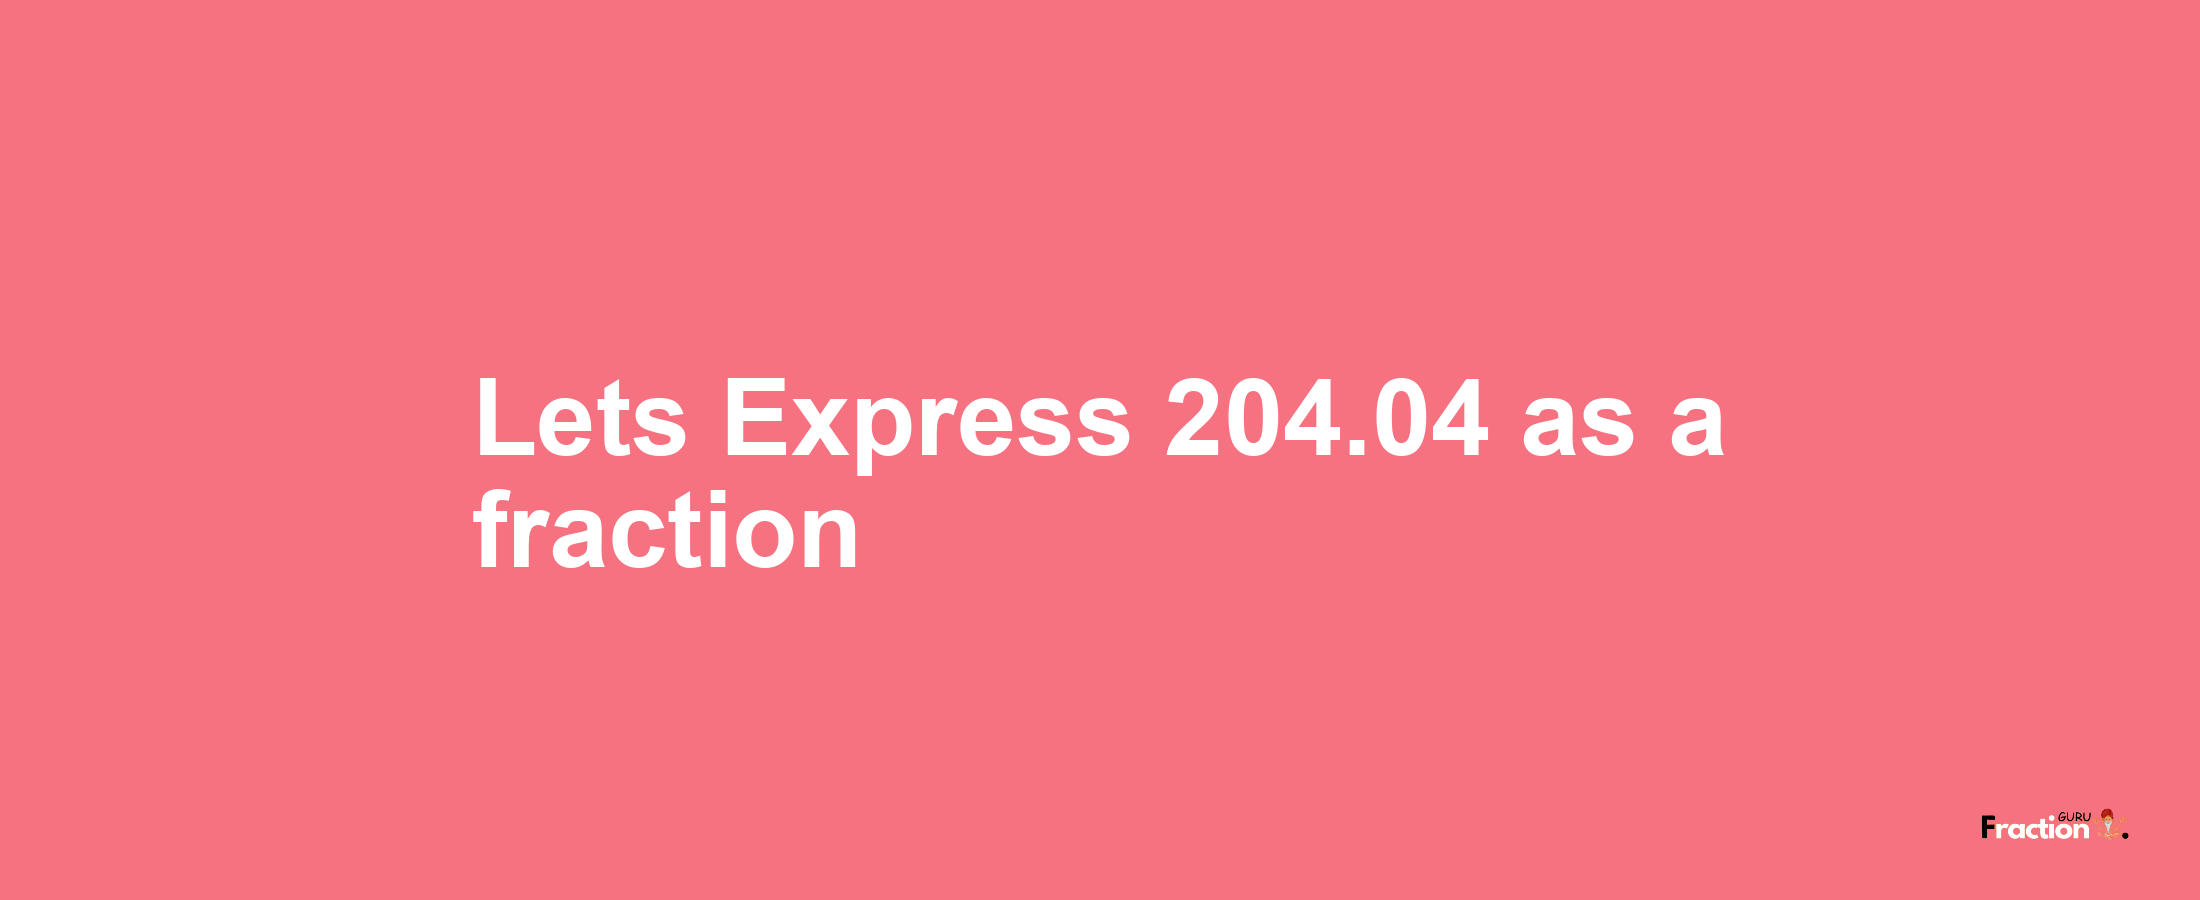 Lets Express 204.04 as afraction